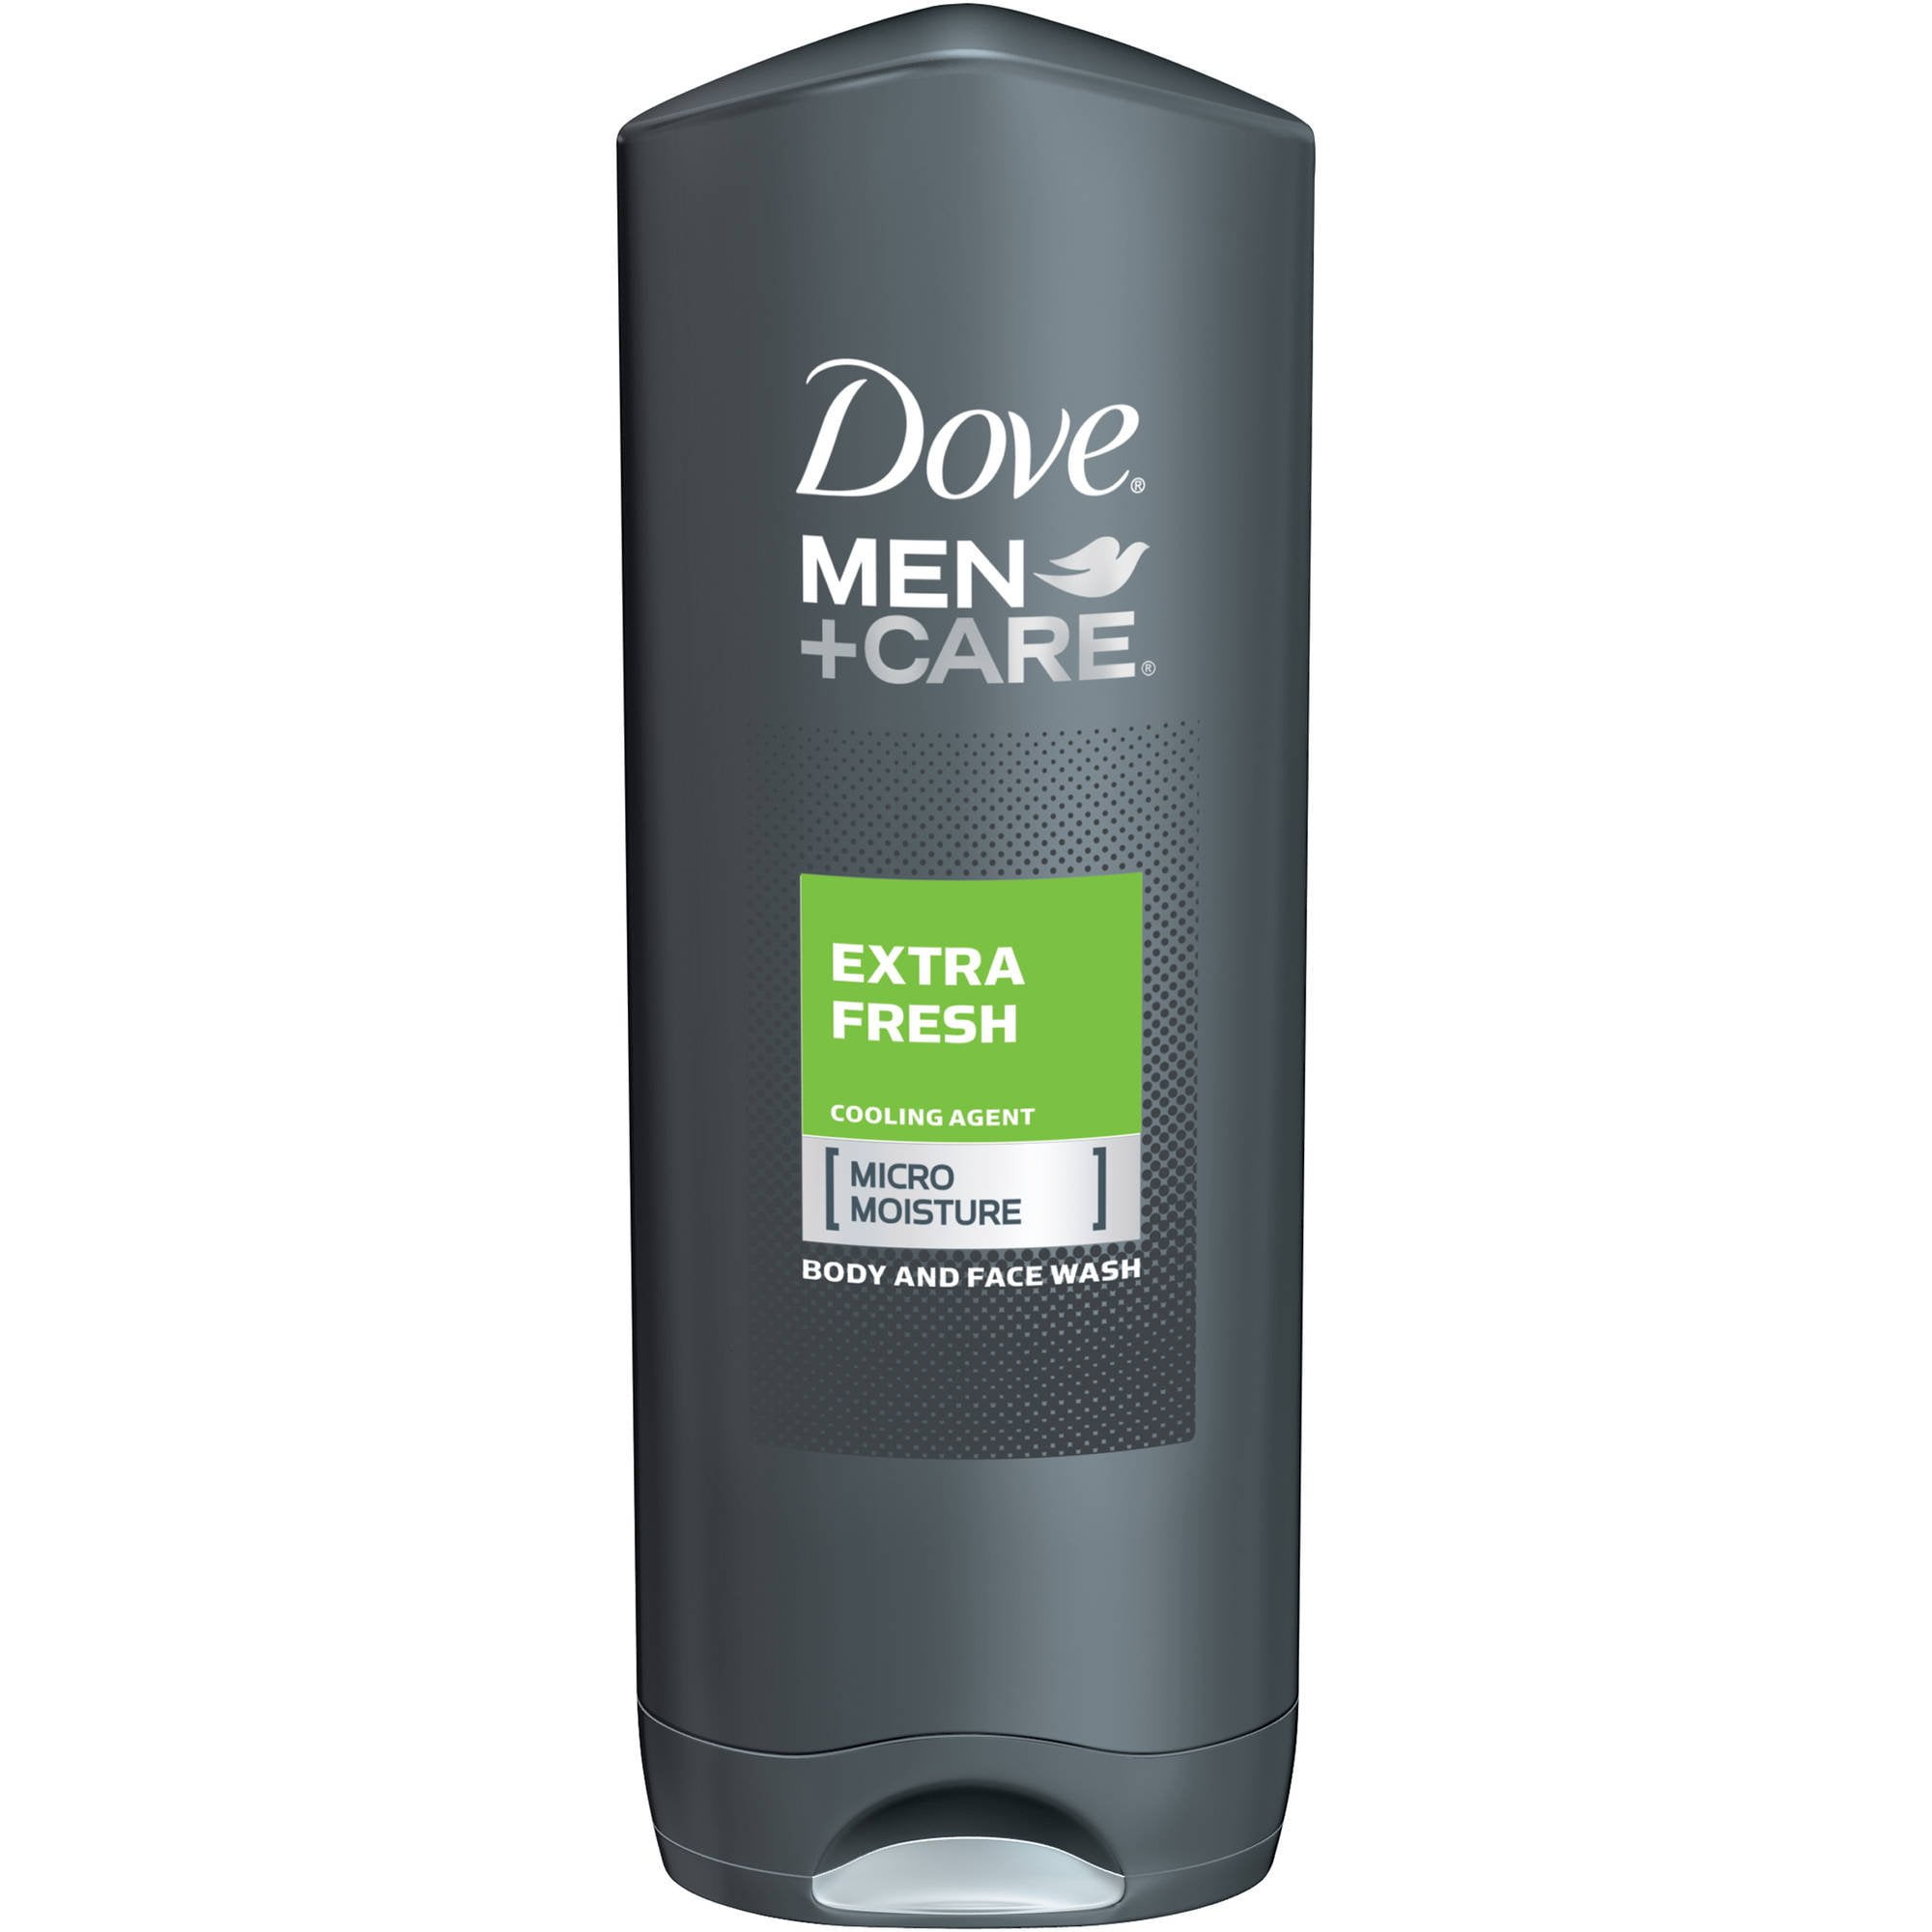 Dove Men Plus Care Body and Face Wash, Extra Fresh, 13.5 Ounce (Pack of ...